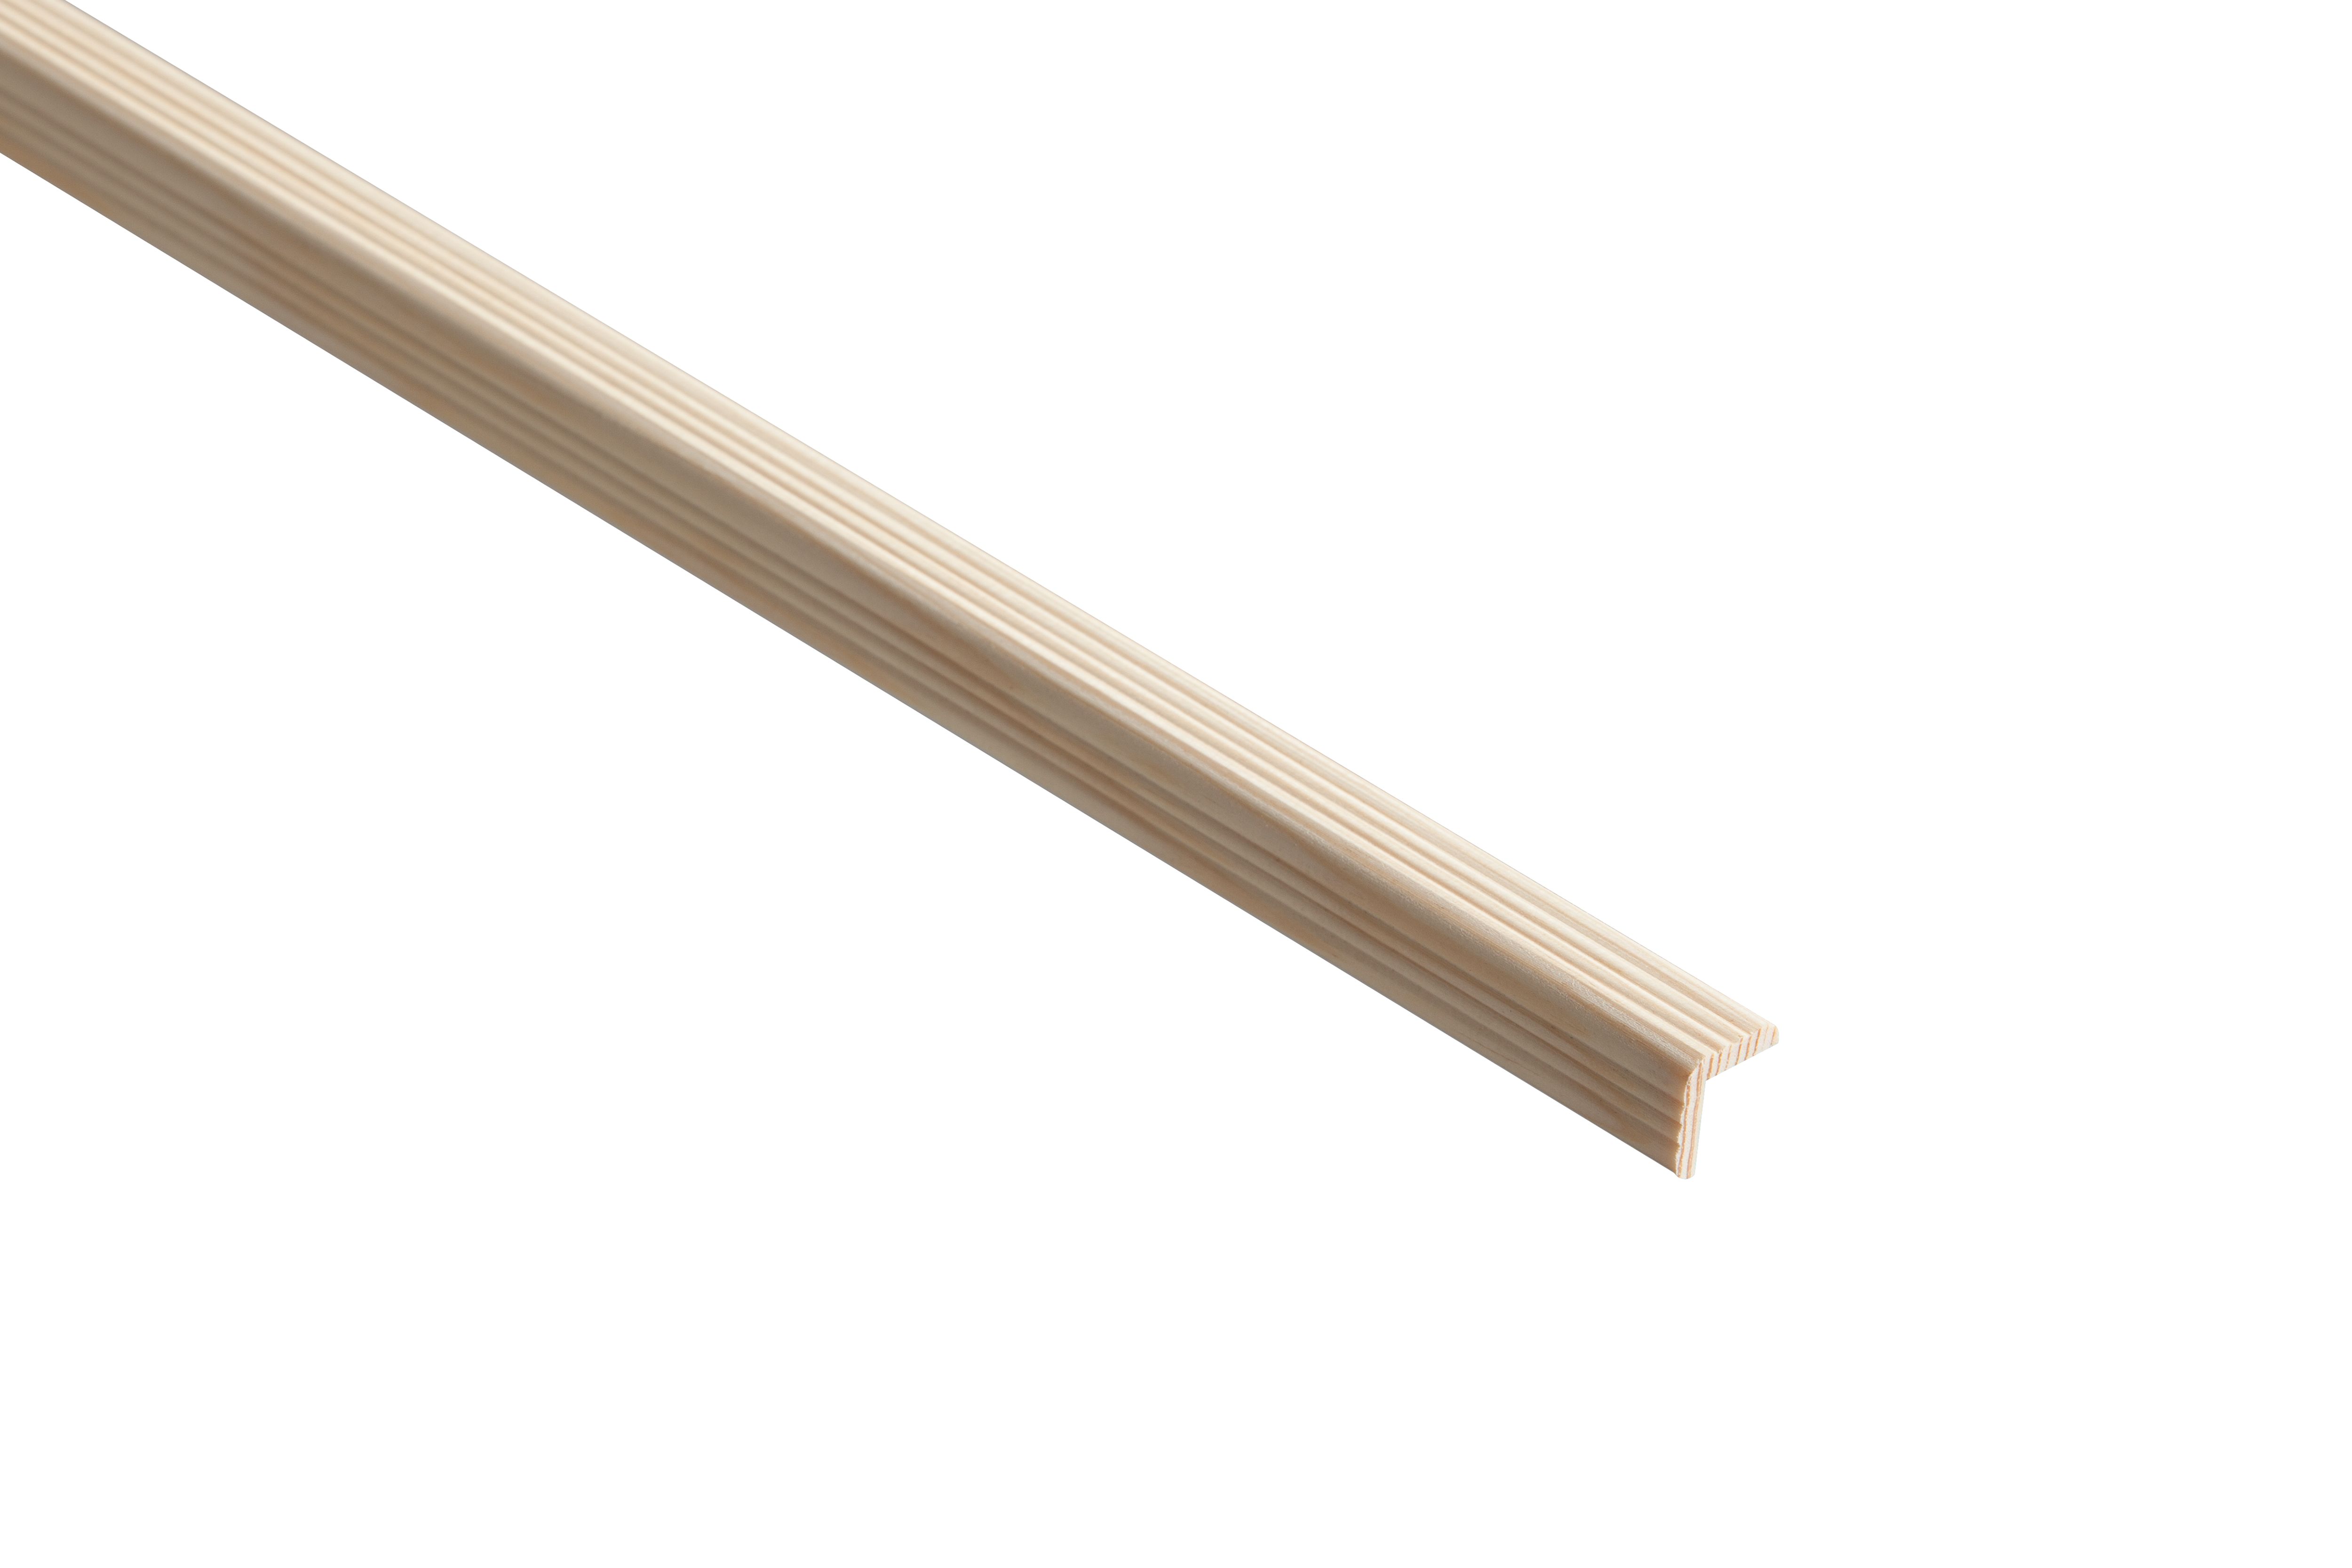 Image of Wickes Pine Reed Angle Moulding - 27 x 27 x 2400mm